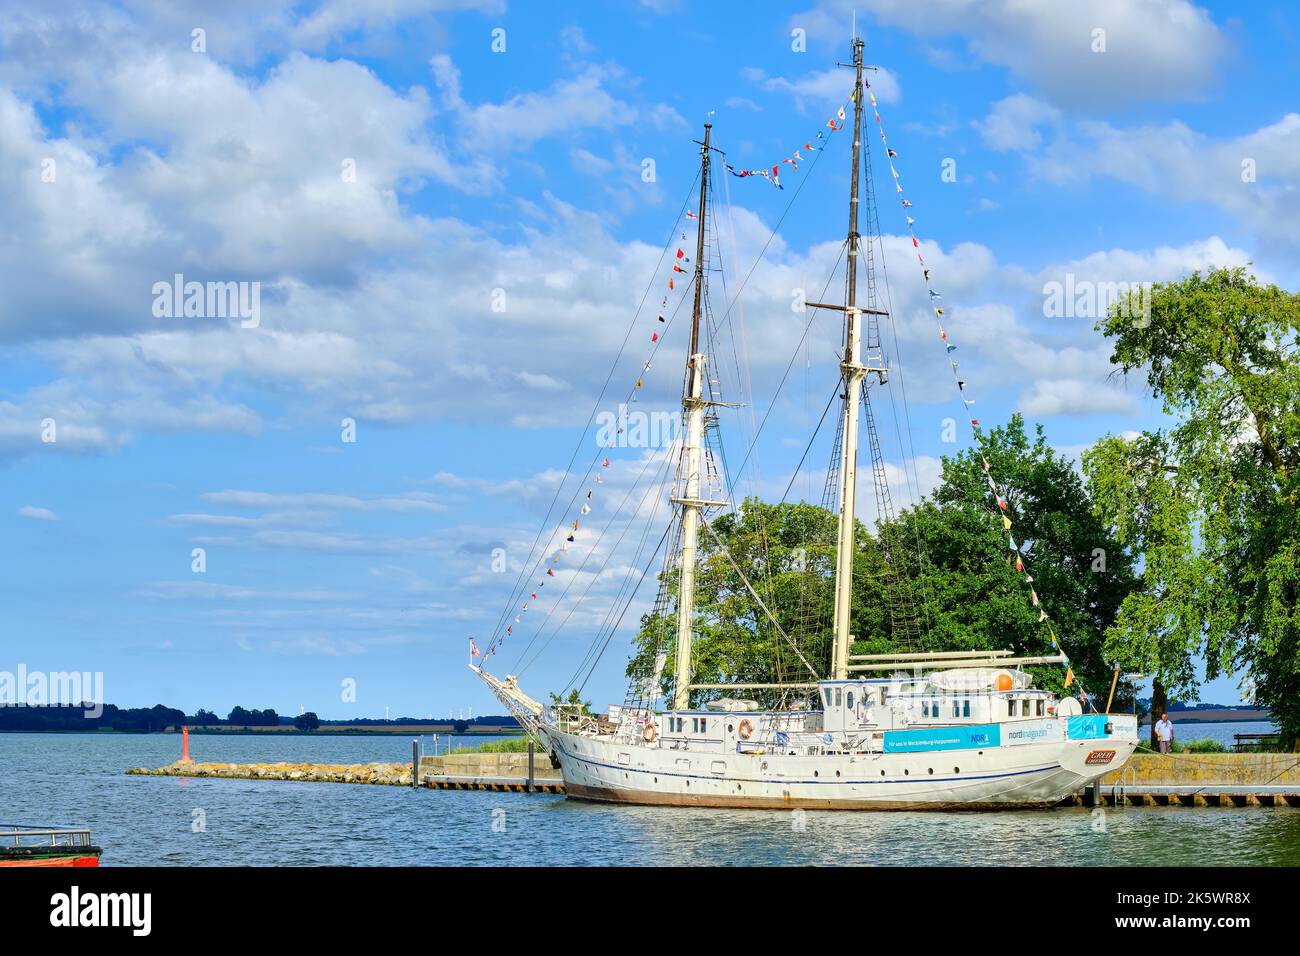 The sail training vessel GREIF ex WILHELM PIECK at its berth in the town harbour of Greifswald Wieck, Mecklenburg-Western Pomerania, Germany. Stock Photo